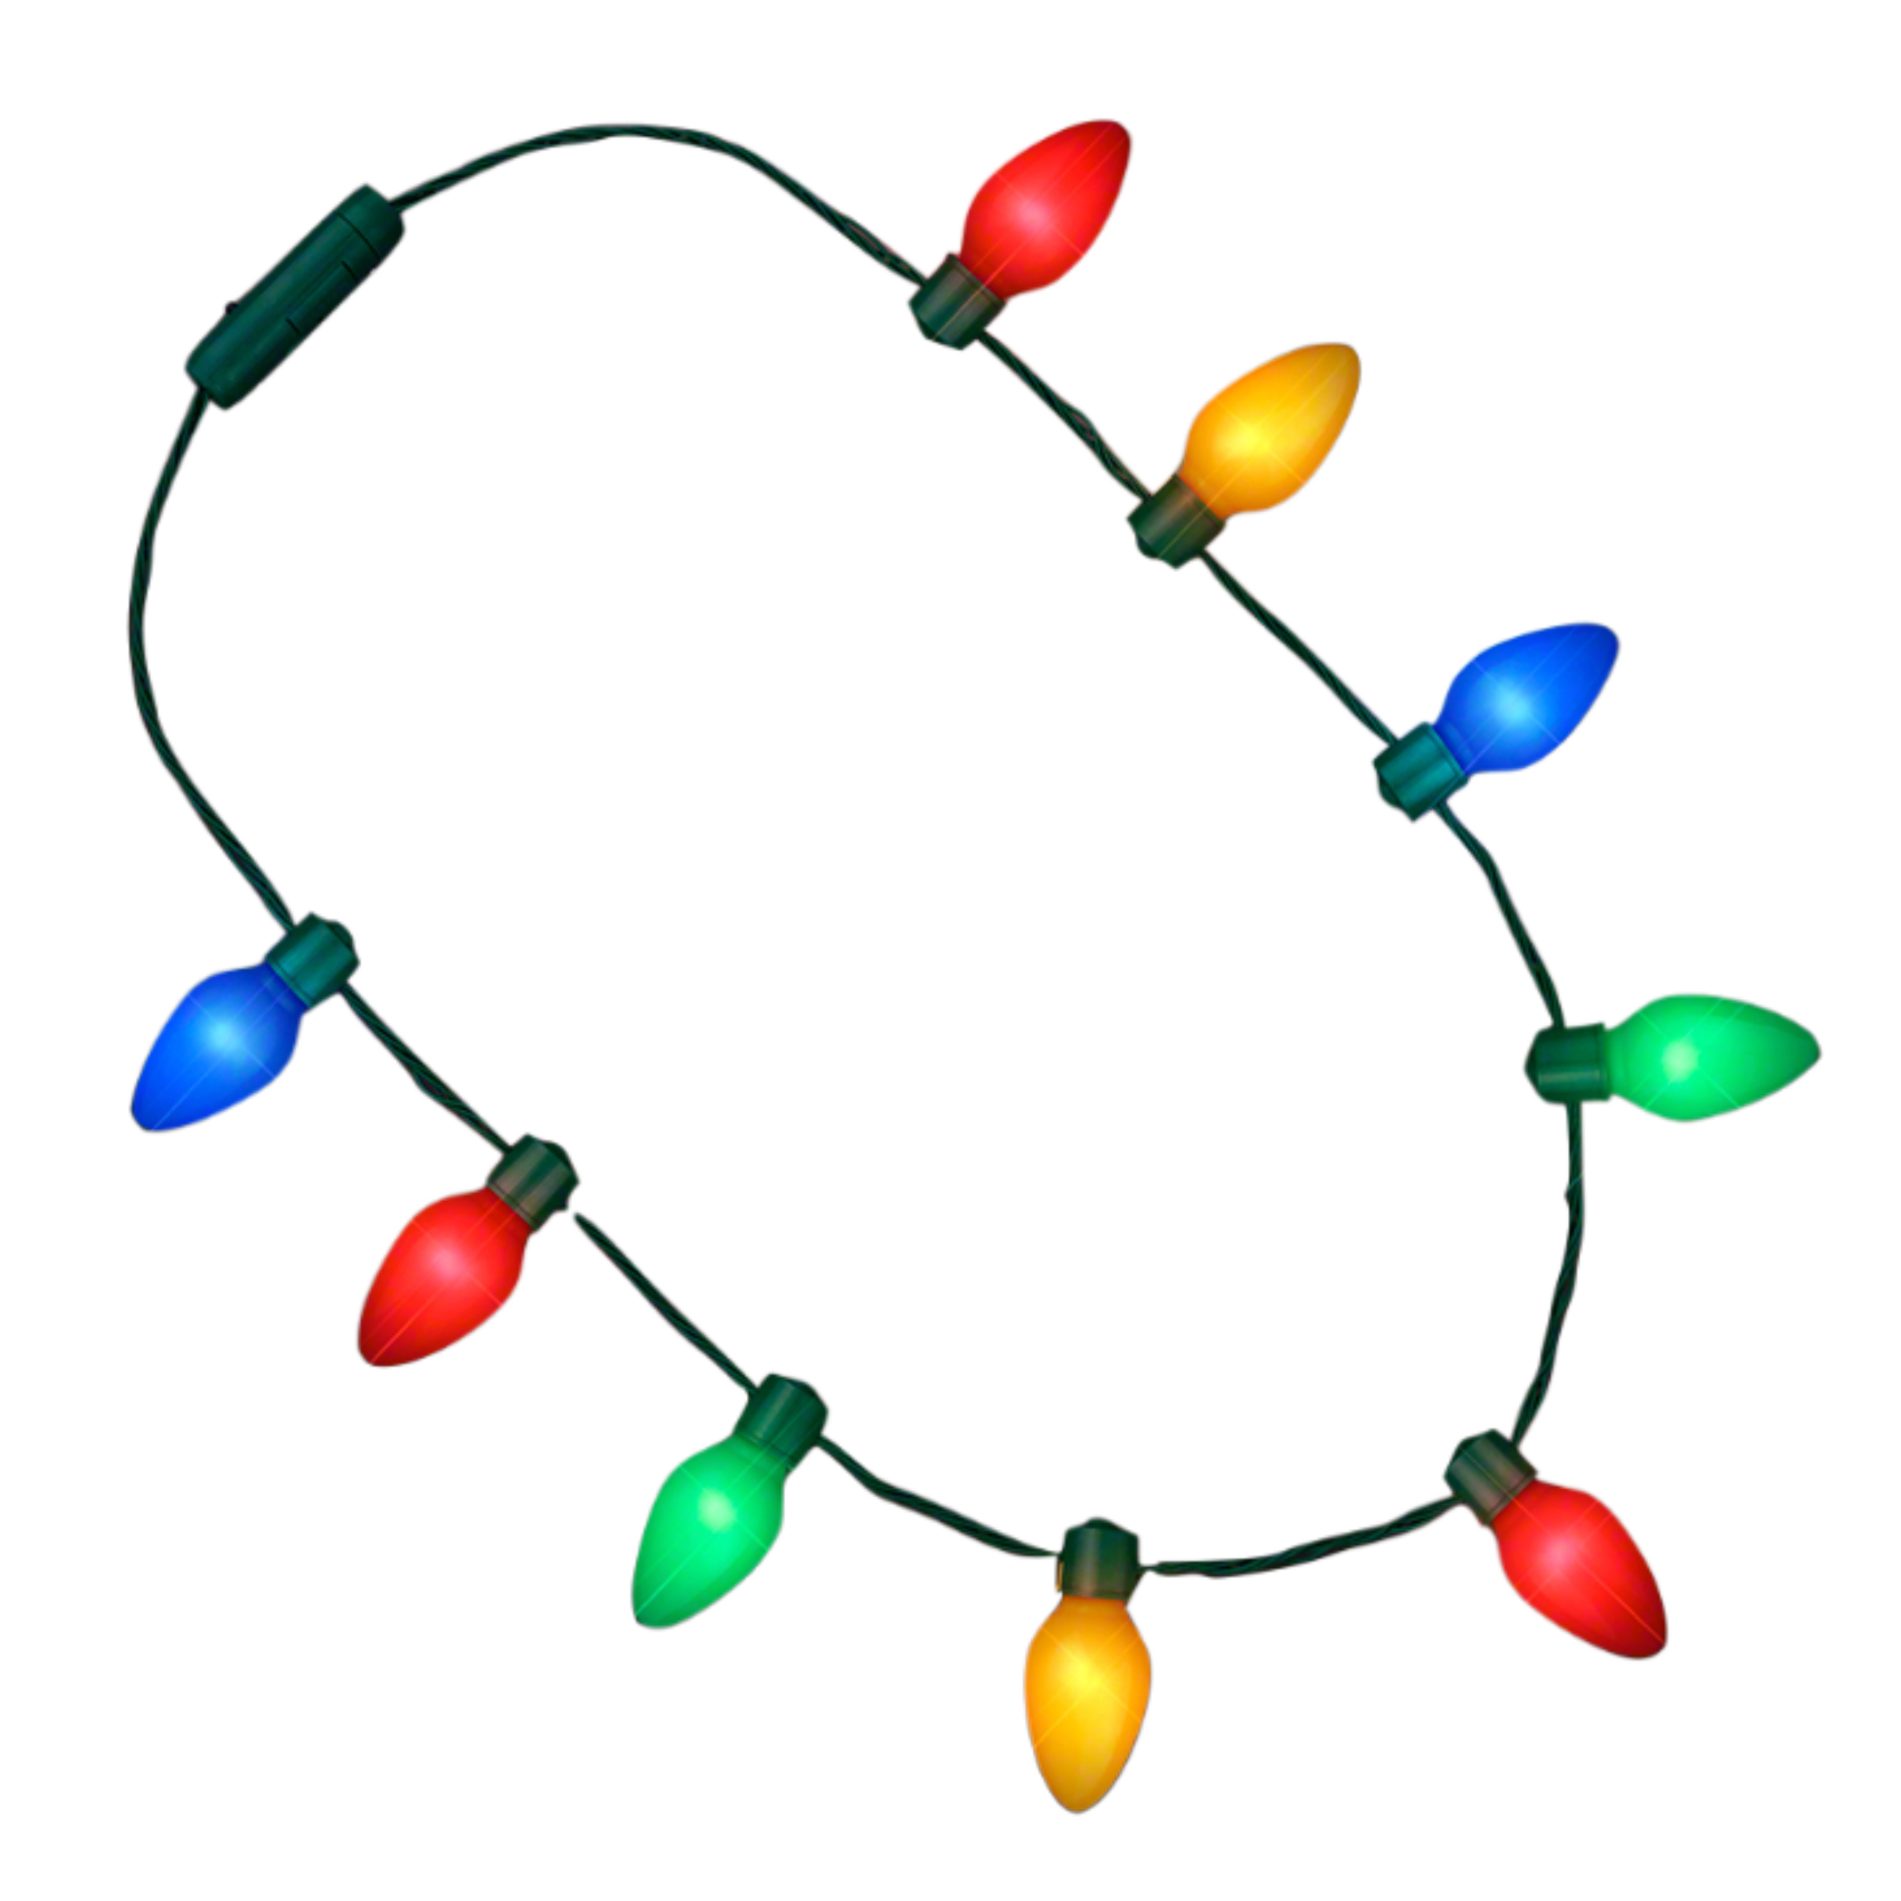 9 Bulbs Huge Old School Wearable Christmas Light Necklace All Products 3